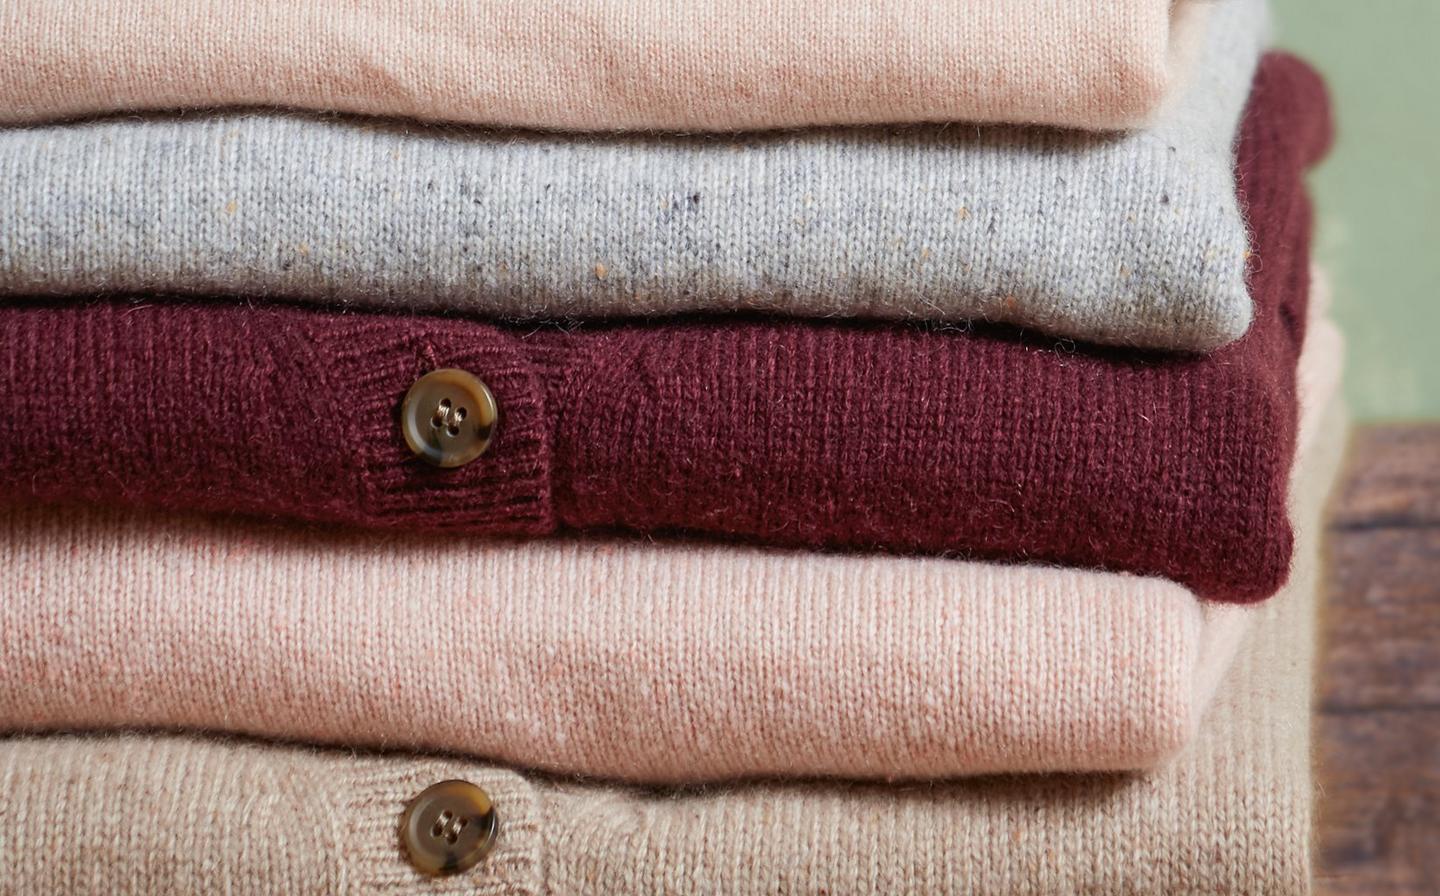 A neatly folded pile of beautifully soft cashmere knitwear from FatFace